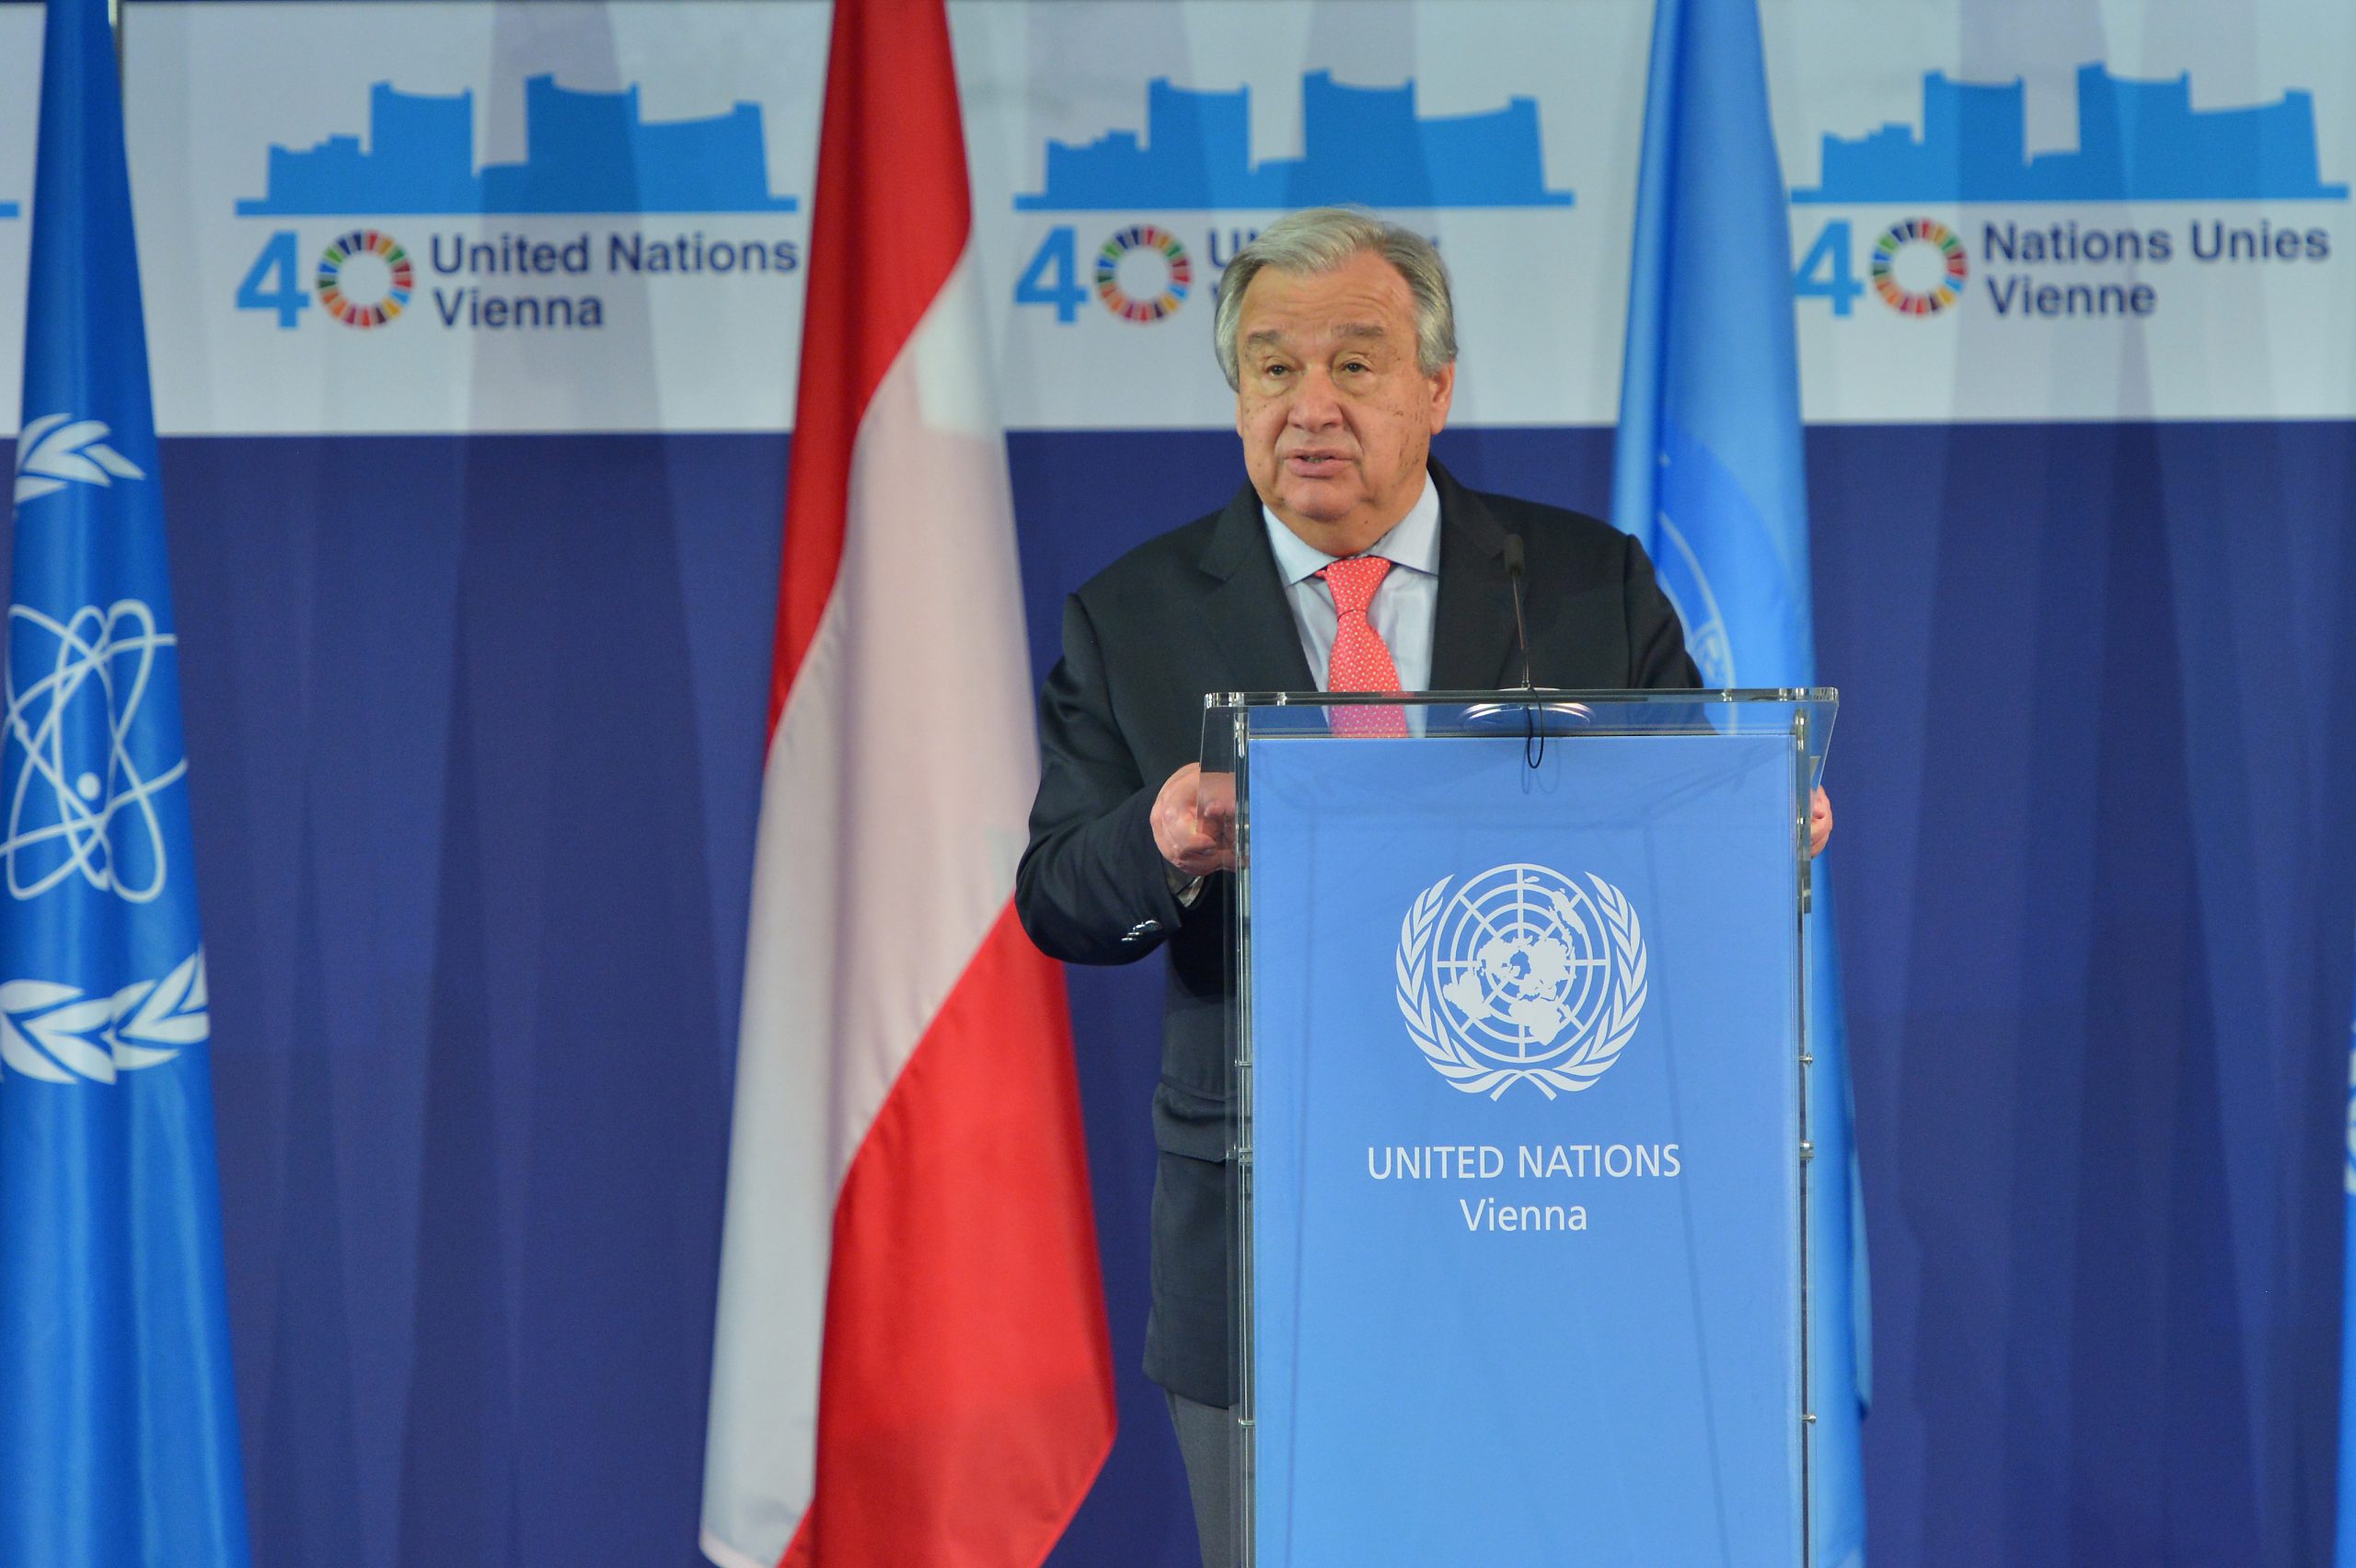 <p>Antonio Guterres, the UN Secretary General, has called for a fund to help developing countries deal with the impact of the pandemic [image by: Dean Calma / IAEA / Flickr]</p>